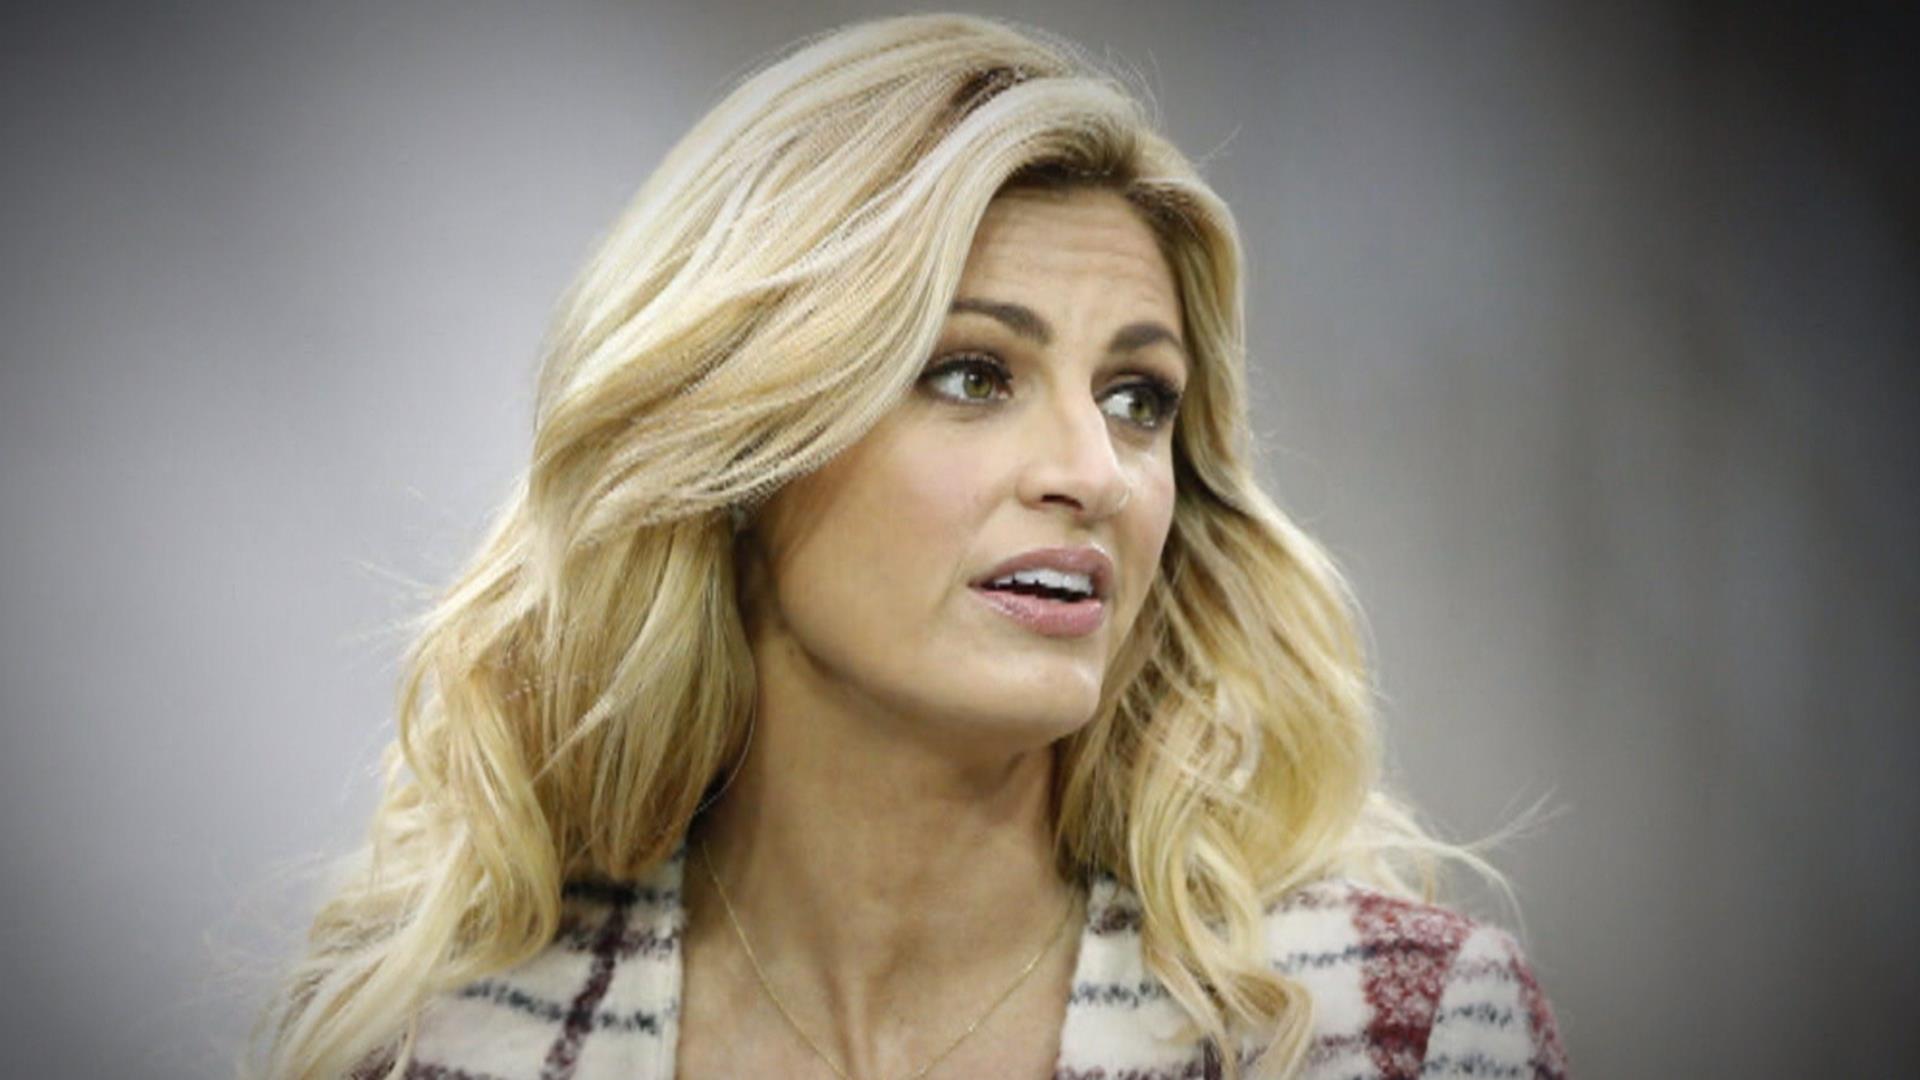 cheyenne smiley recommends erin andrews keyhole video pic